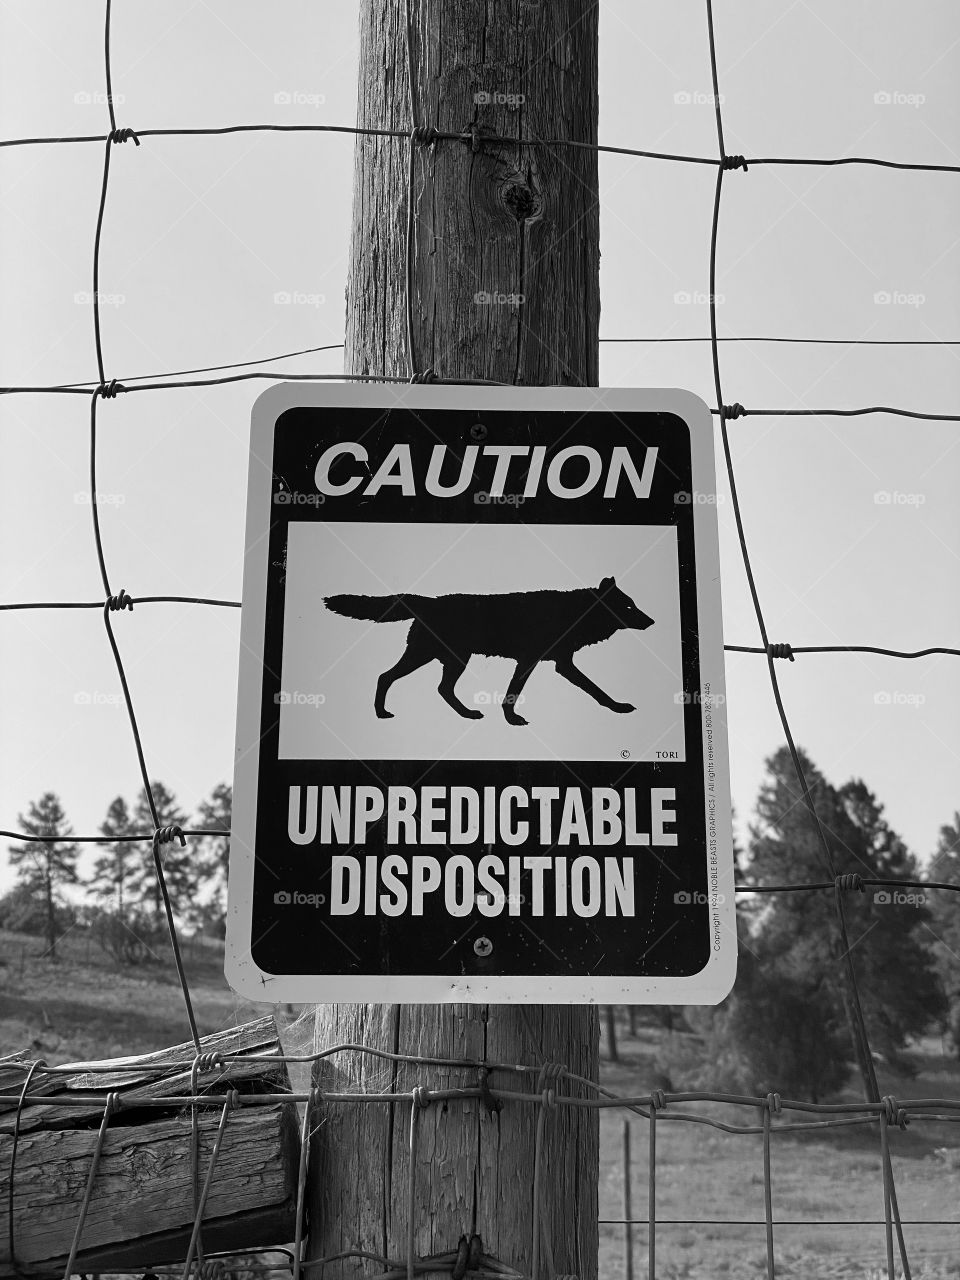 Caution sign of an unpredictable animal